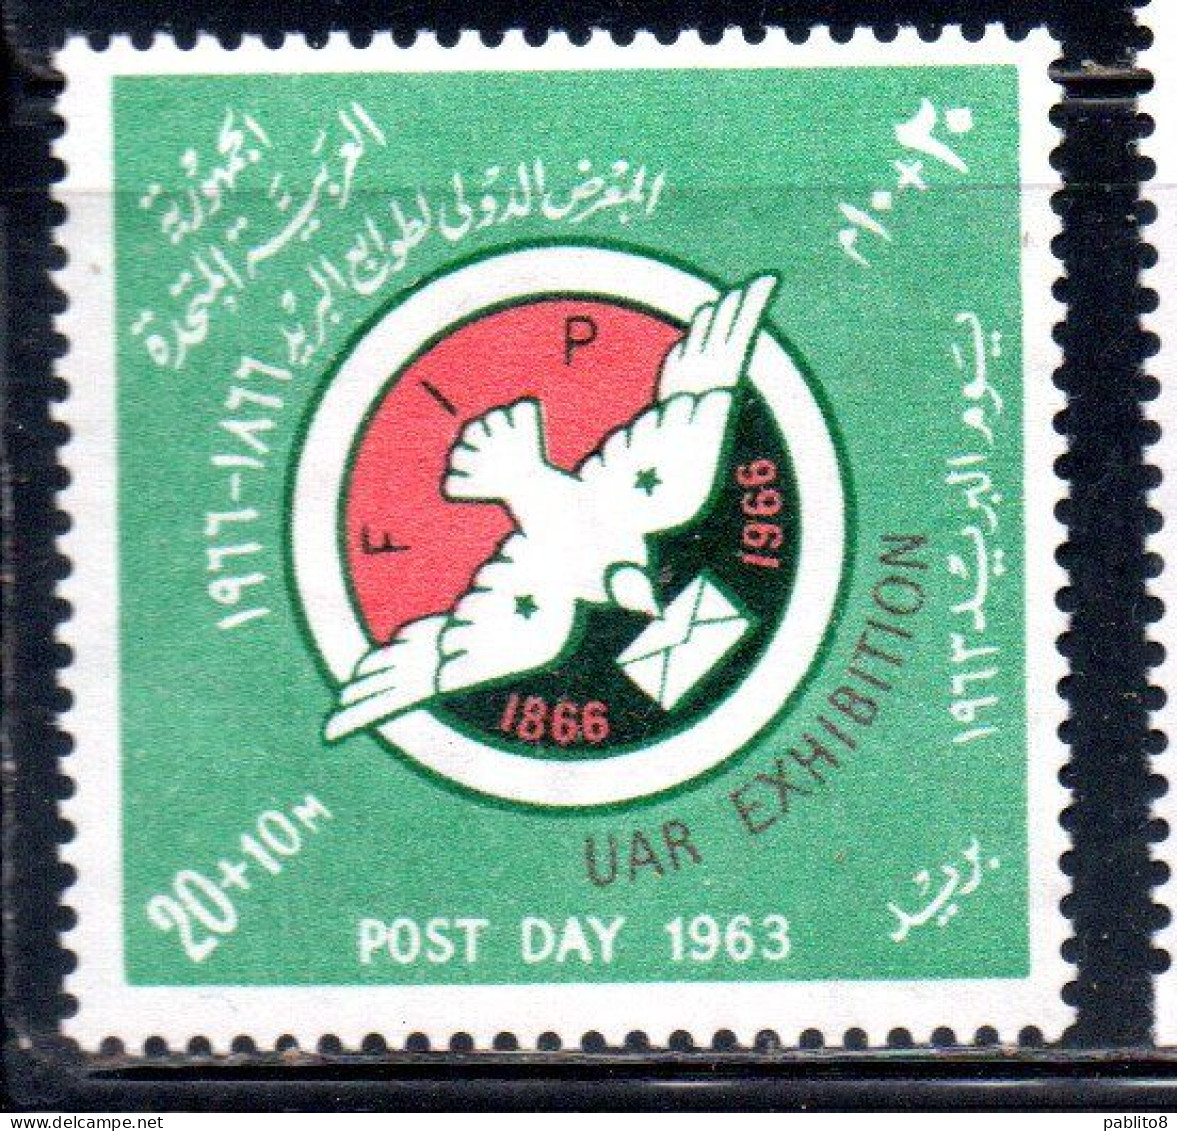 UAR EGYPT EGITTO 1963 POST DAY AND STAMP EXHIBITION 1966 OF THE FIP 20m + 10m MNH - Nuovi